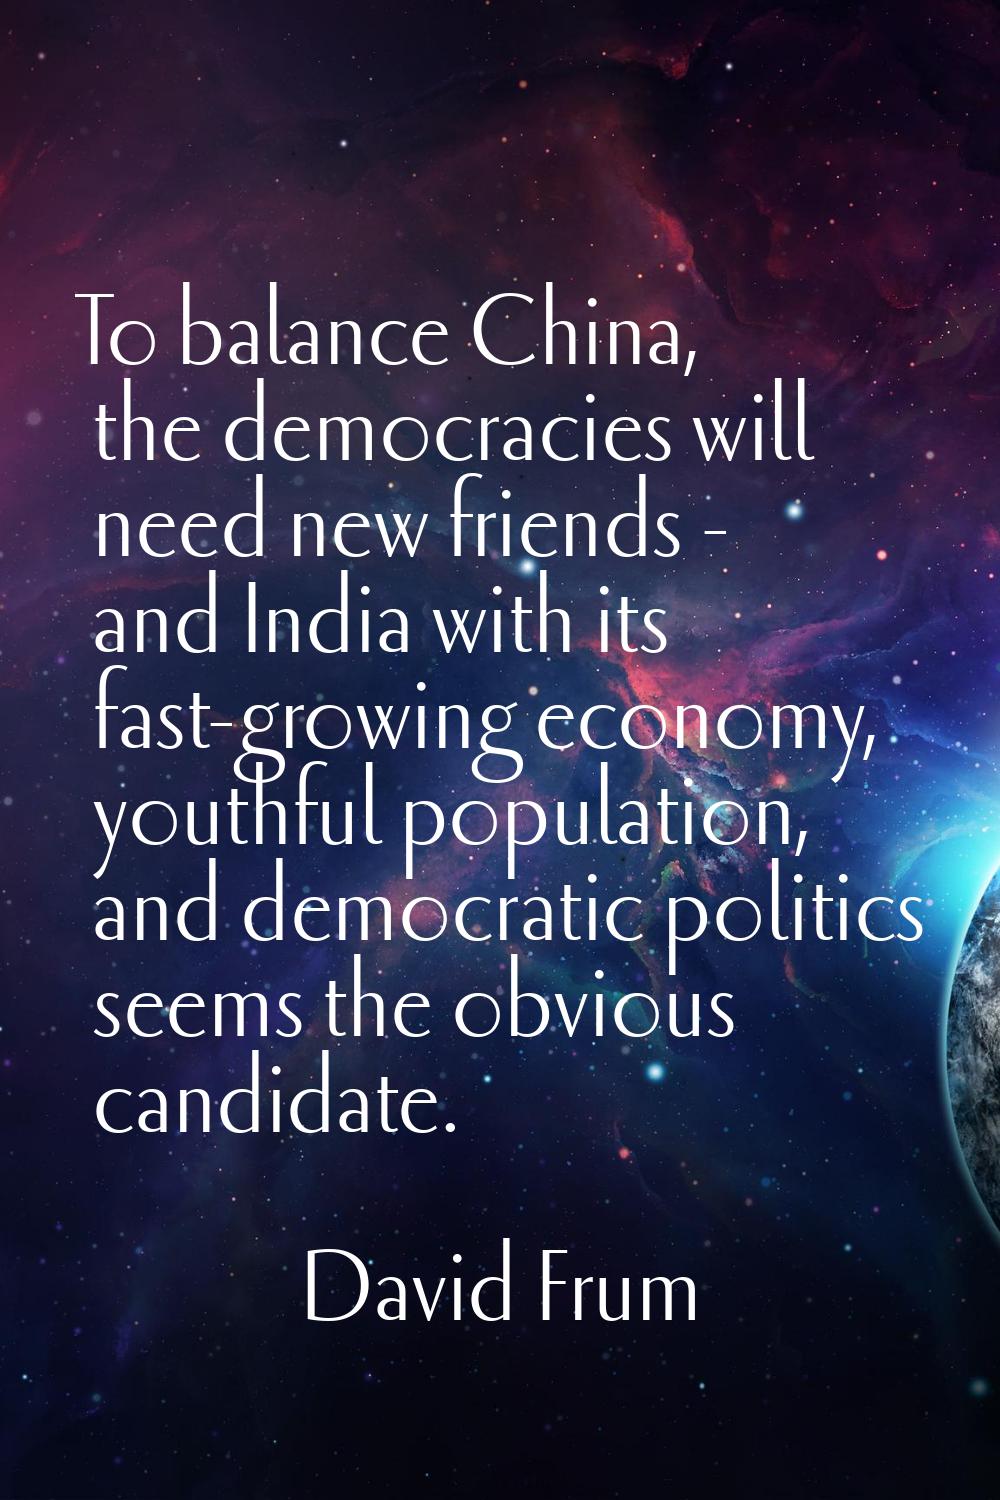 To balance China, the democracies will need new friends - and India with its fast-growing economy, 